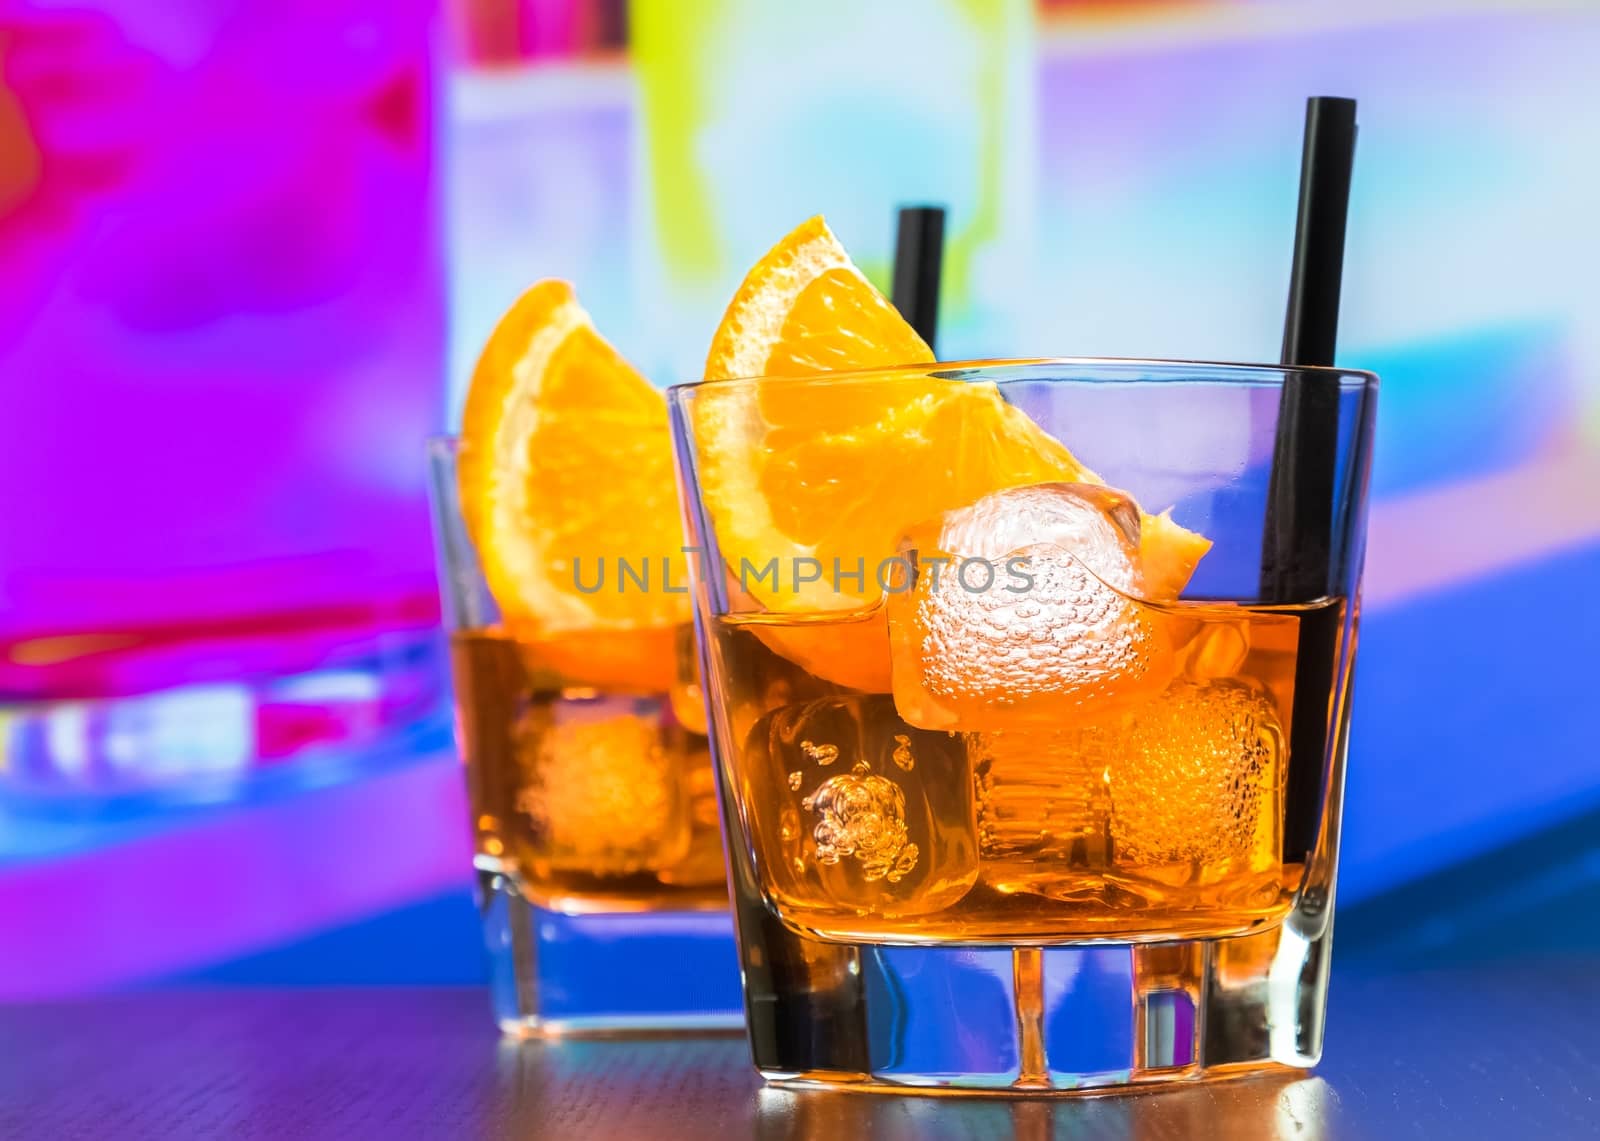 two glasses of spritz aperitif aperol cocktail with orange slices and ice cubes on bar table, disco atmosphere background, lounge bar concept